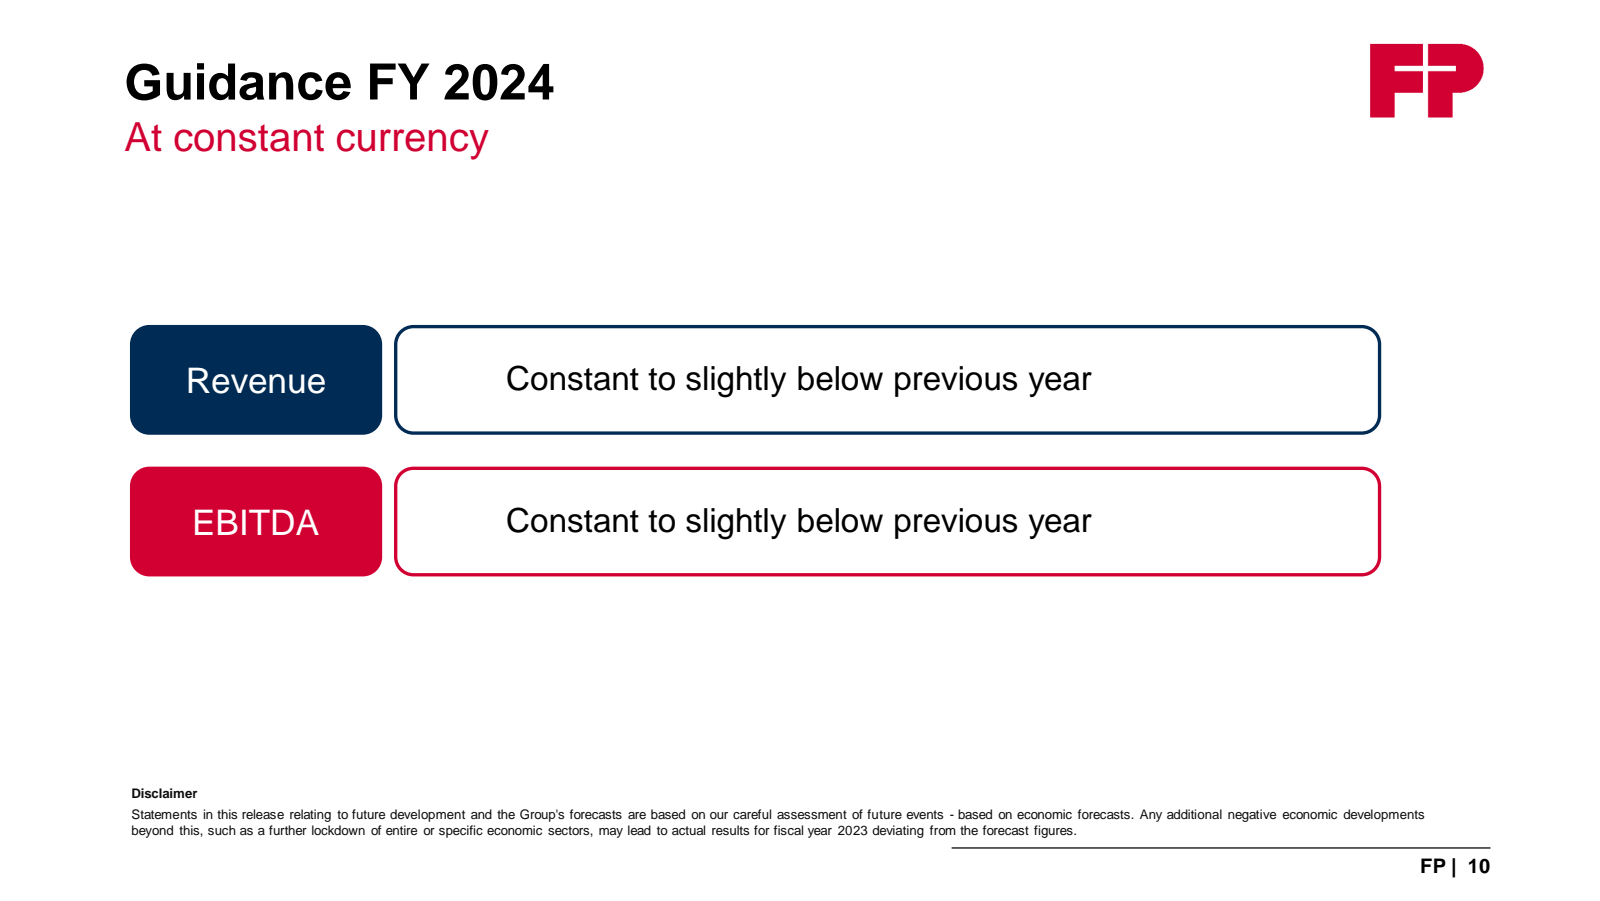 Guidance FY 2024 
At